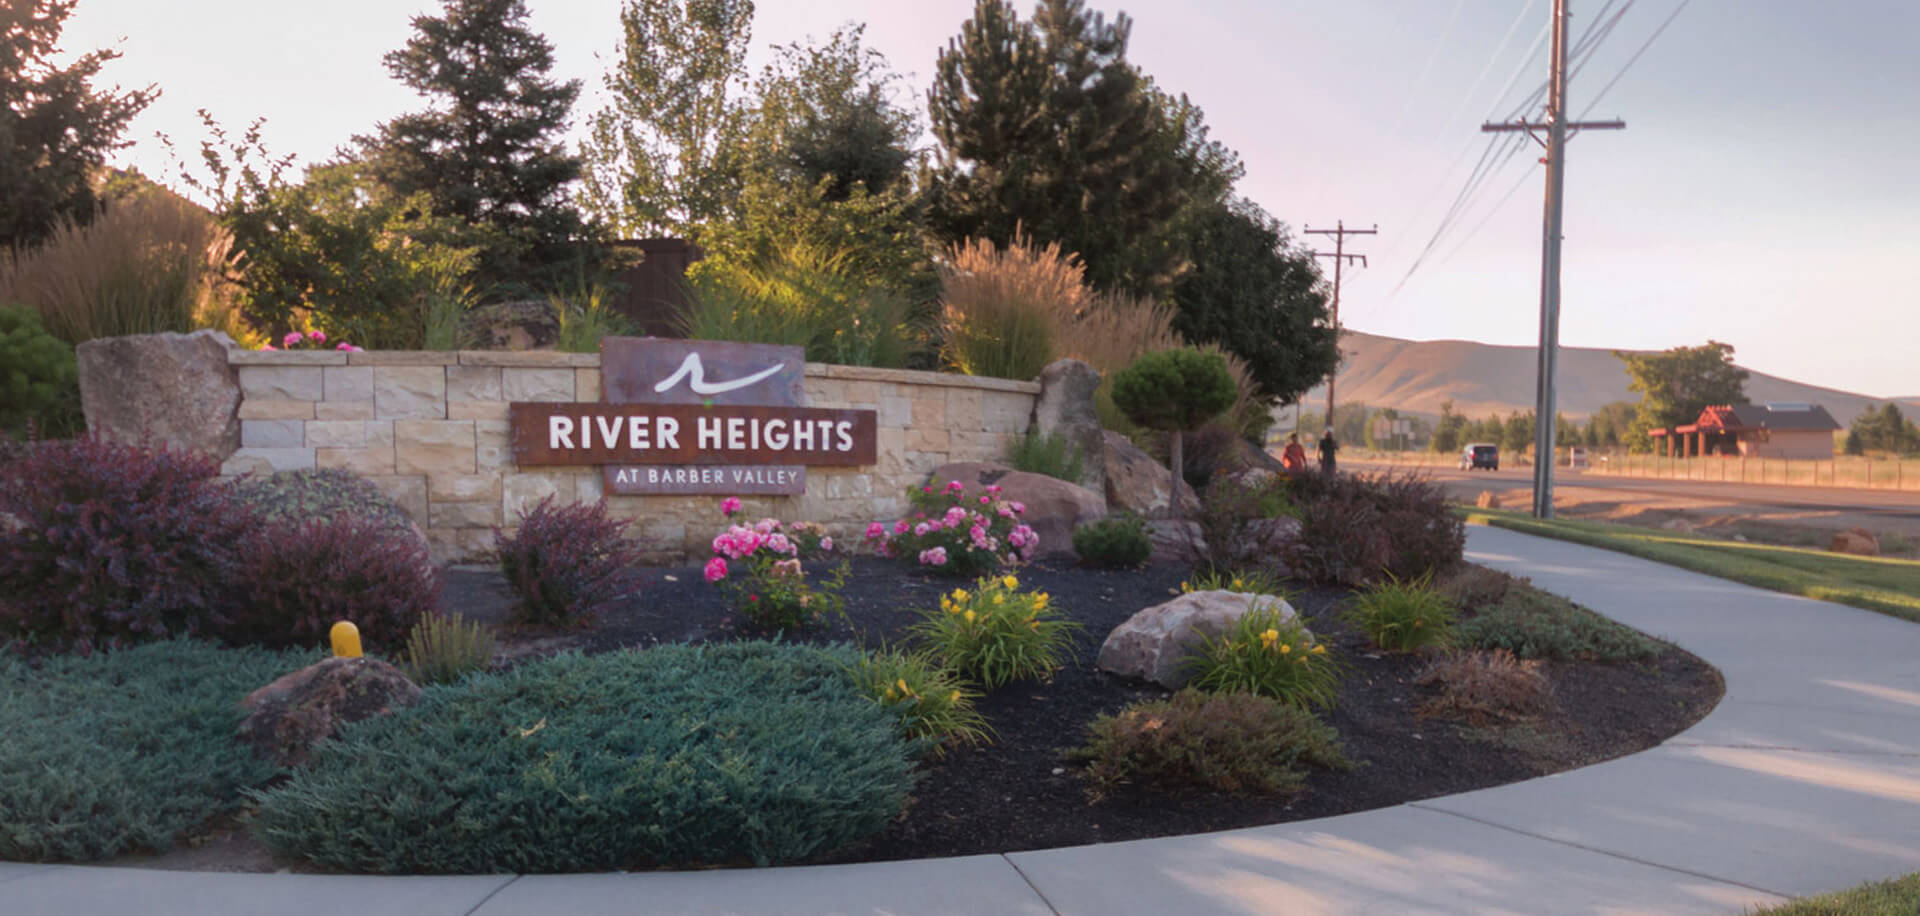 River Heights at Barber Valley Boise ID